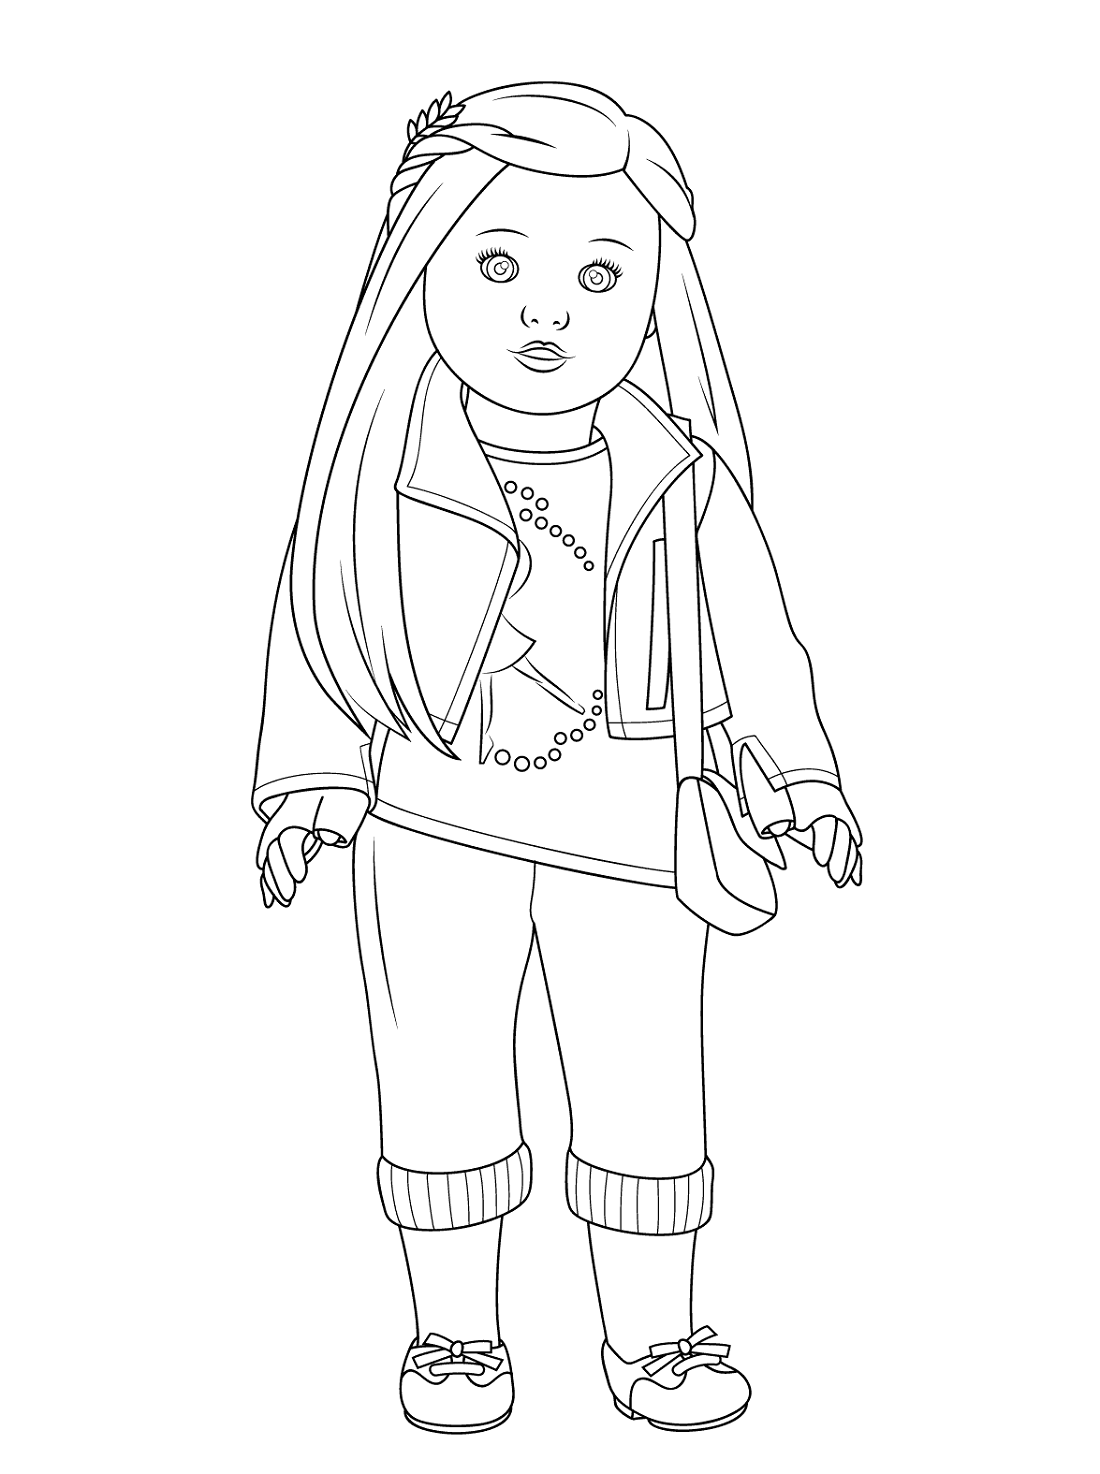 American Girl Doll Coloring Pages Printable   Activity Shelter